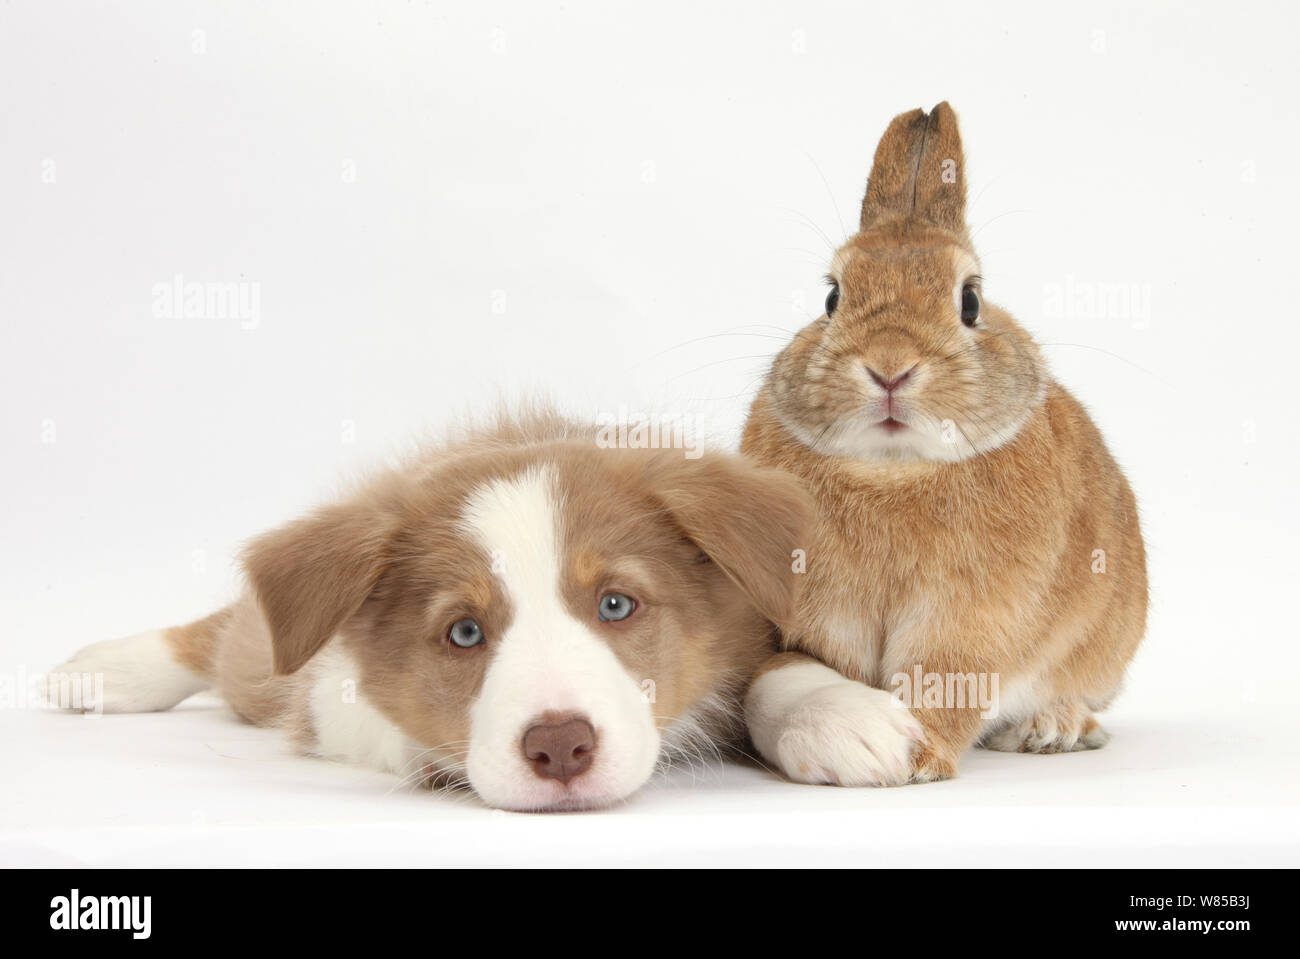 Lilac Border Collie puppy and Netherland dwarf-cross rabbit, Peter. Stock Photo